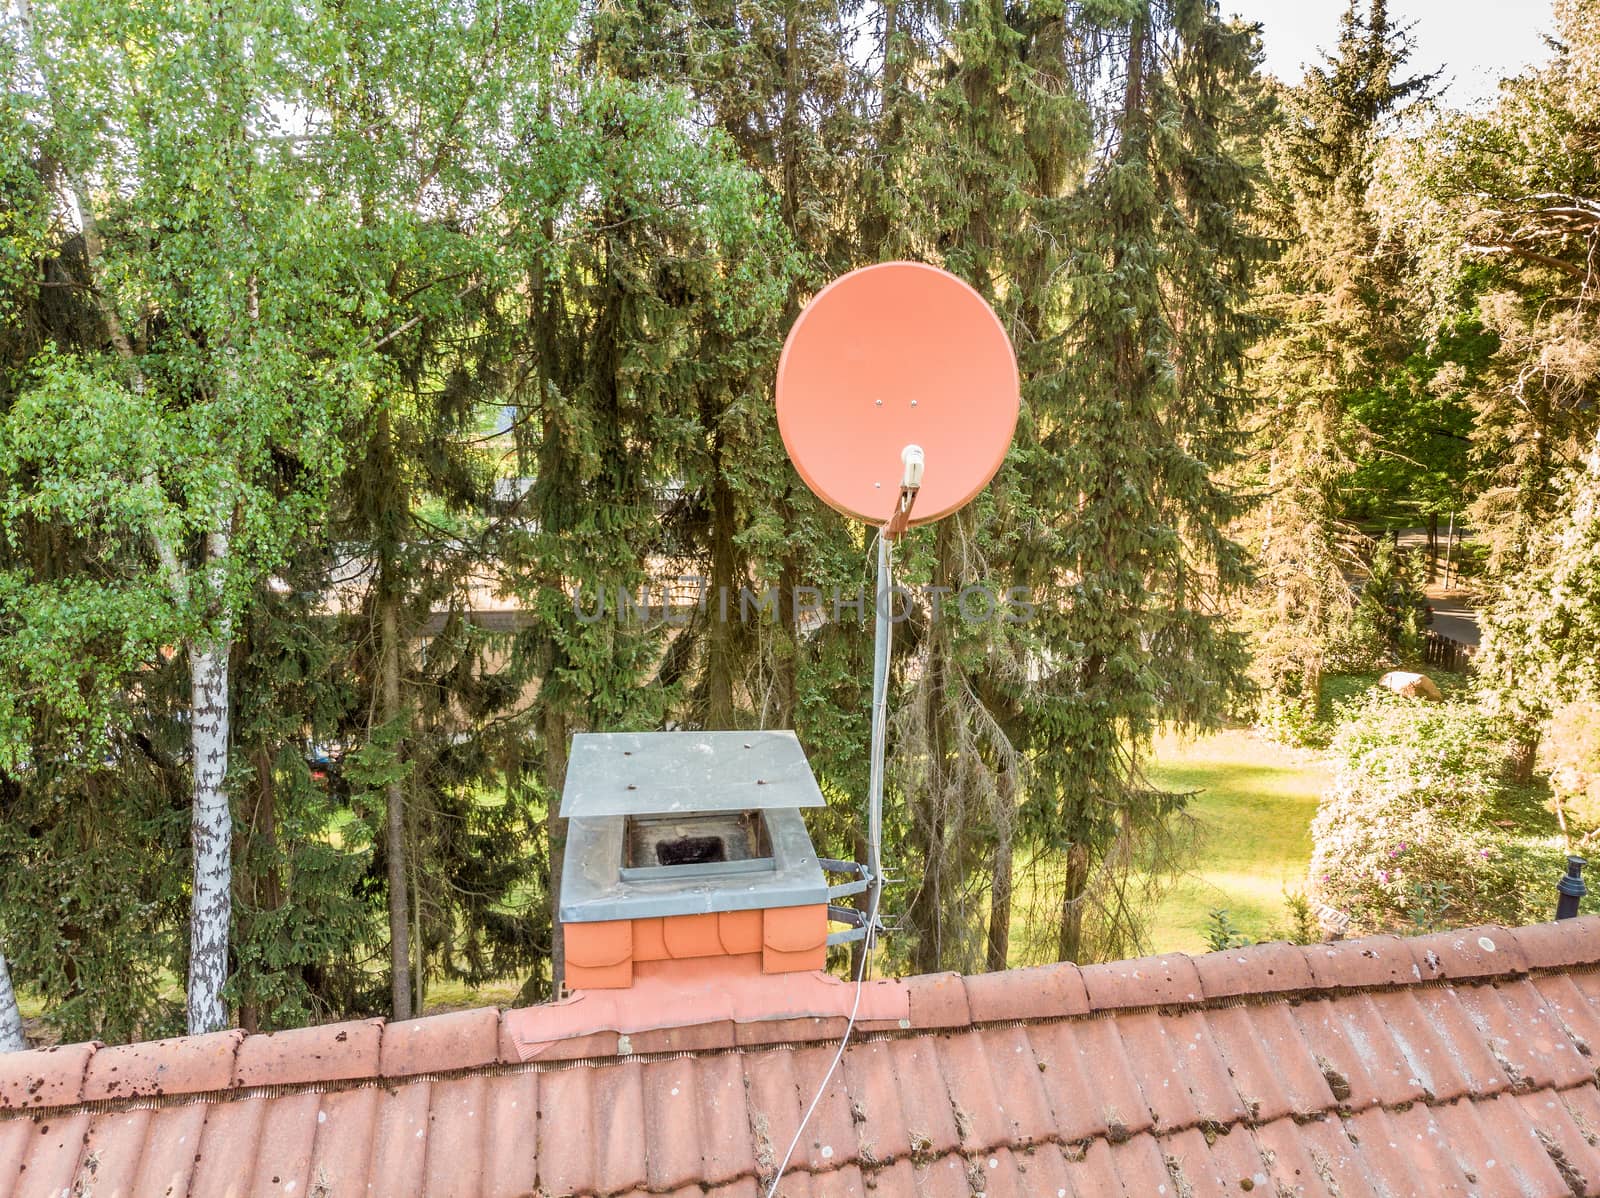 Checking the satellite dish of a house with a drone, aerial photograph, from the roof of a detached house, air intake